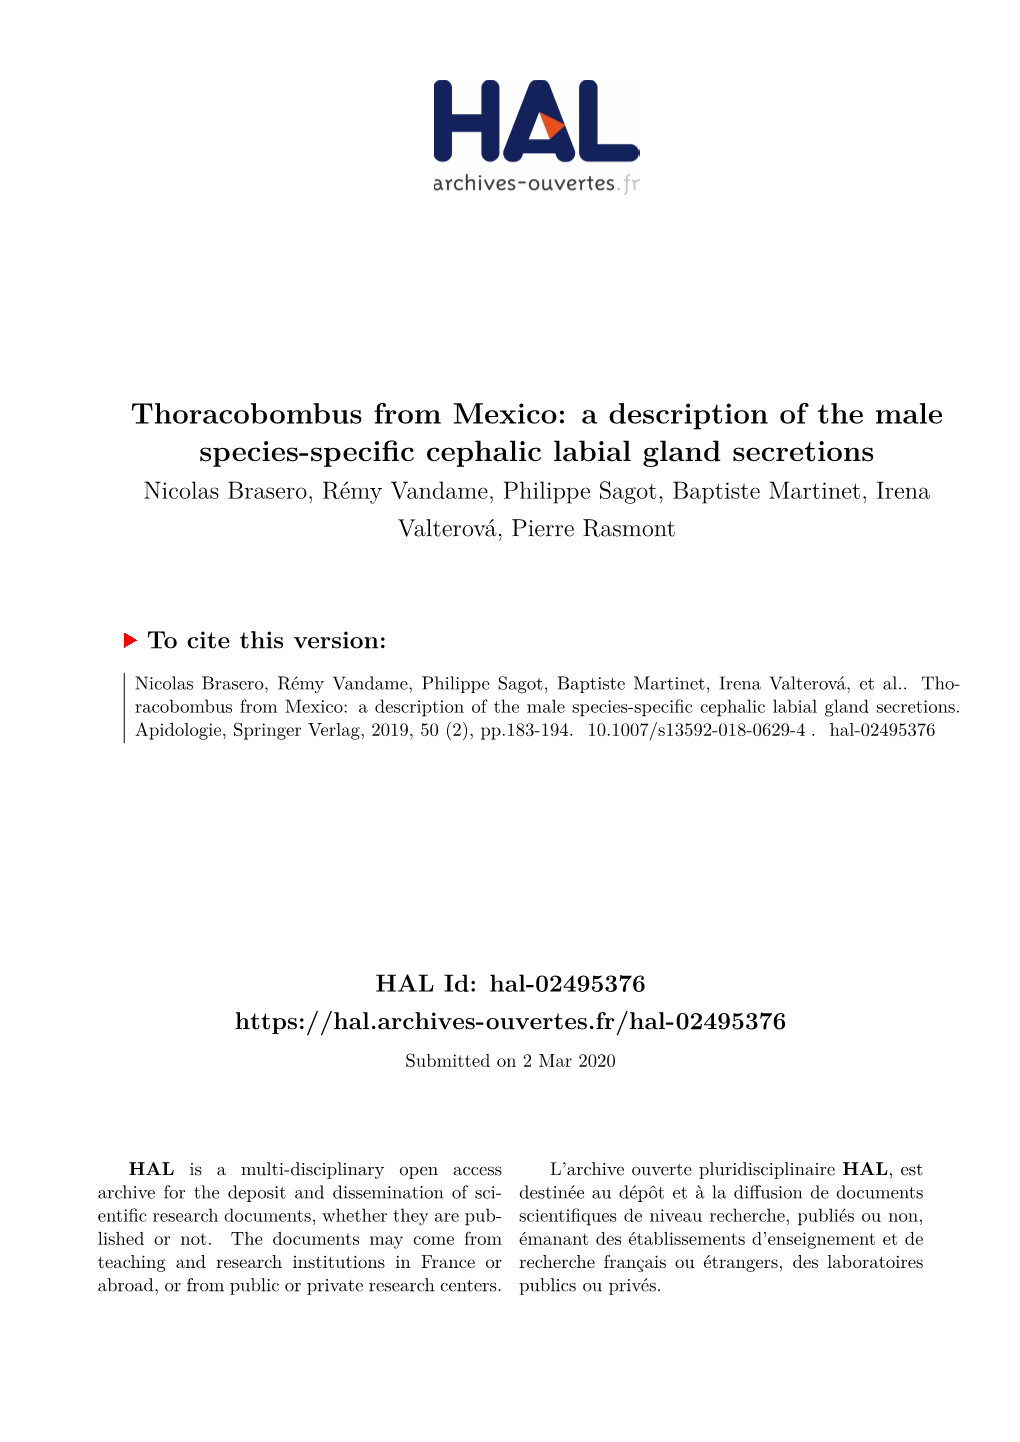 Thoracobombus from Mexico: a Description of the Male Species